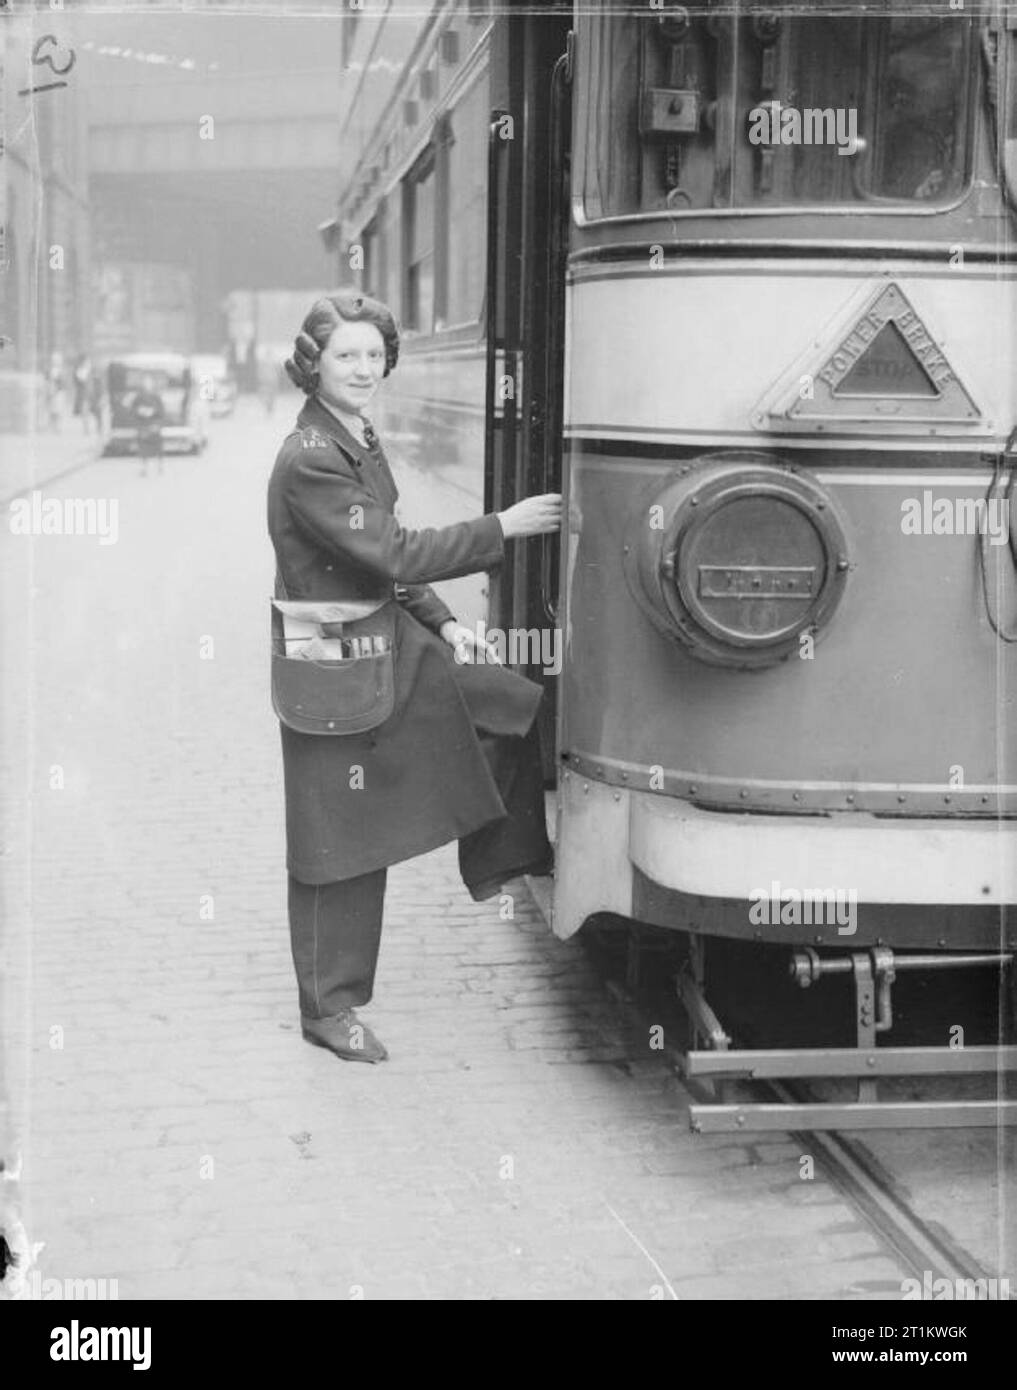 Women Transport Workers in Wartime, C 1942 Mrs Winifred Twigg, a tram conductress, climbs aboard her tram in Leeds, England. Stock Photo